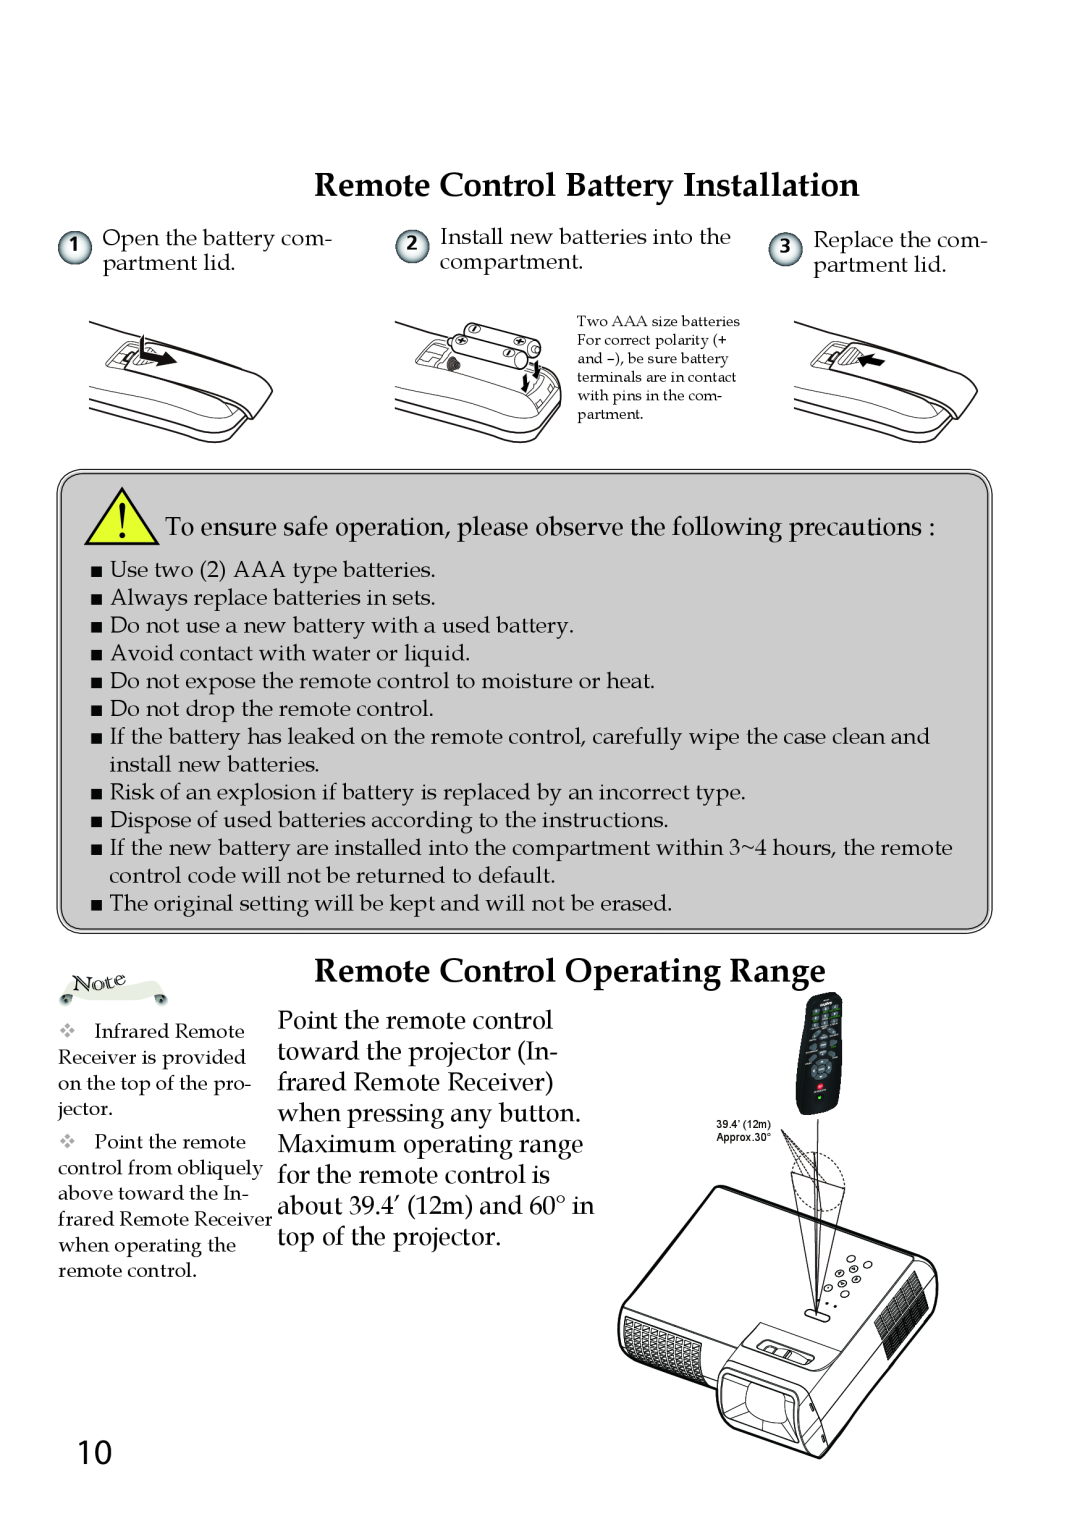 Sanyo PDG-DWL100 owner manual Remote Control Battery Installation, Remote Control Operating Range, Point the remote control 